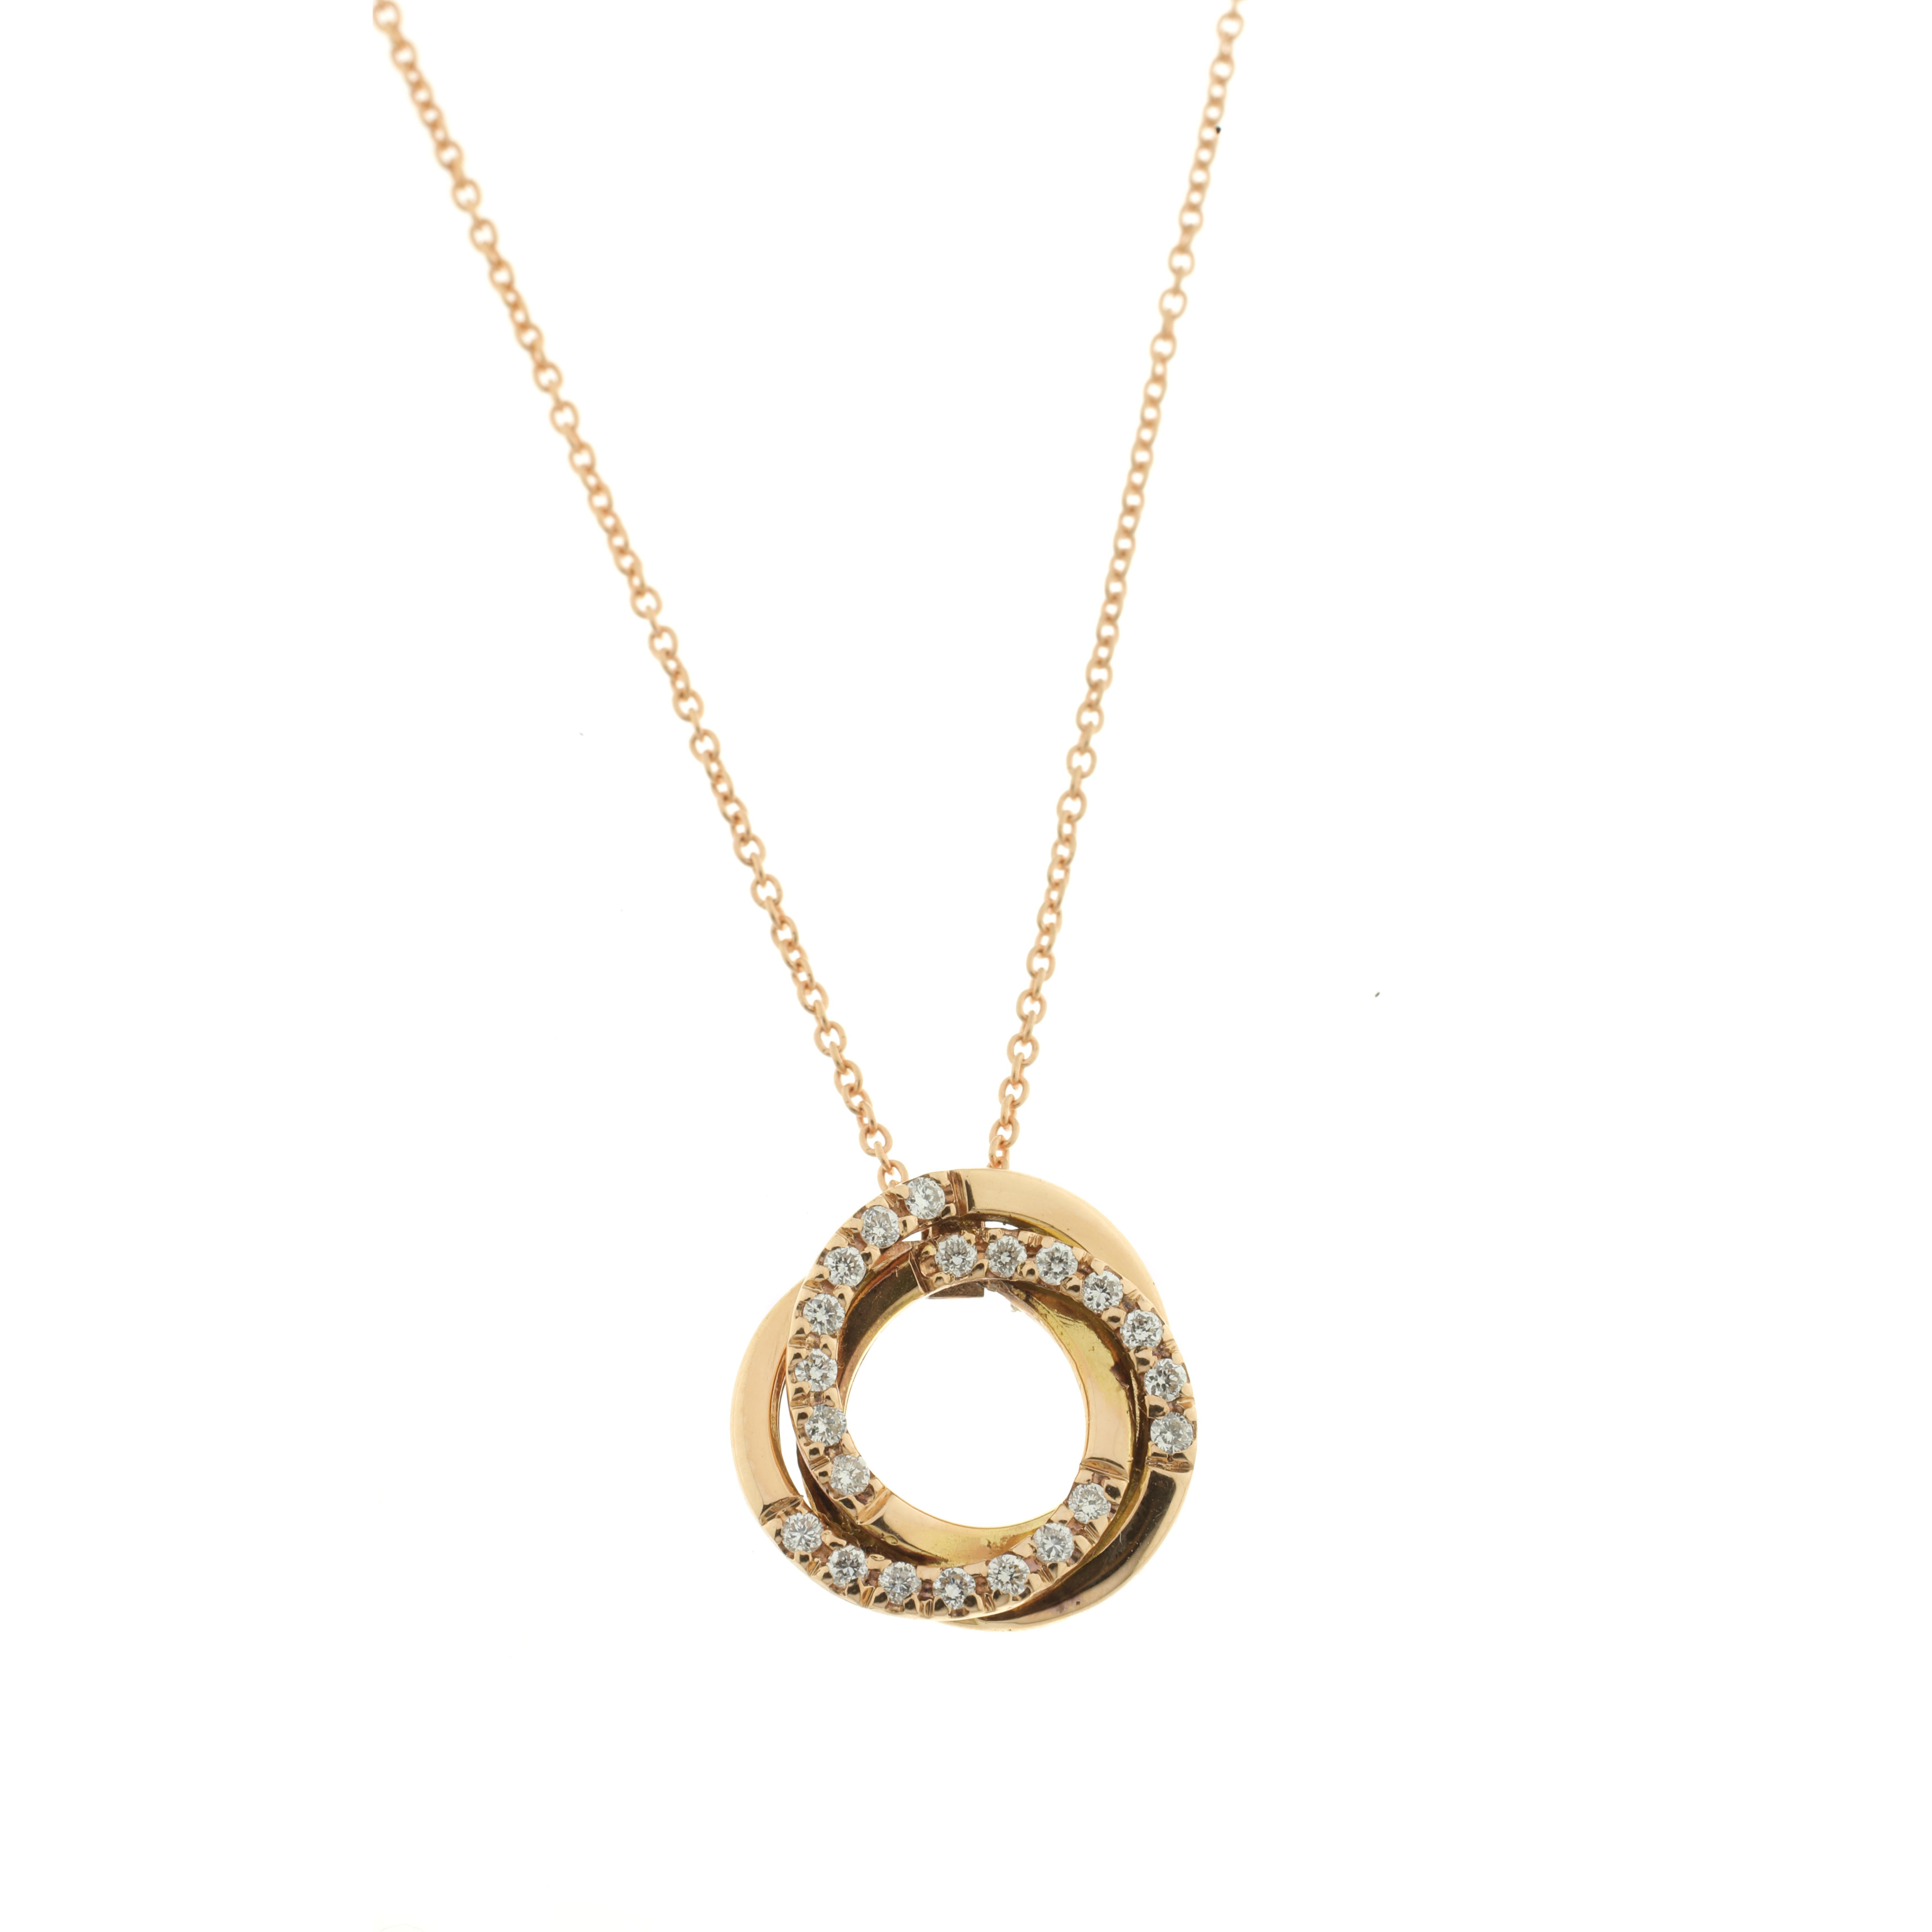 This gorgeous coiled 18-karat rose gold pendant provides the perfect backdrop for 21 carefully selected white diamonds and hangs from a rose gold chain made of two sizes of links. Hand-made using traditional methods, this singular piece has been